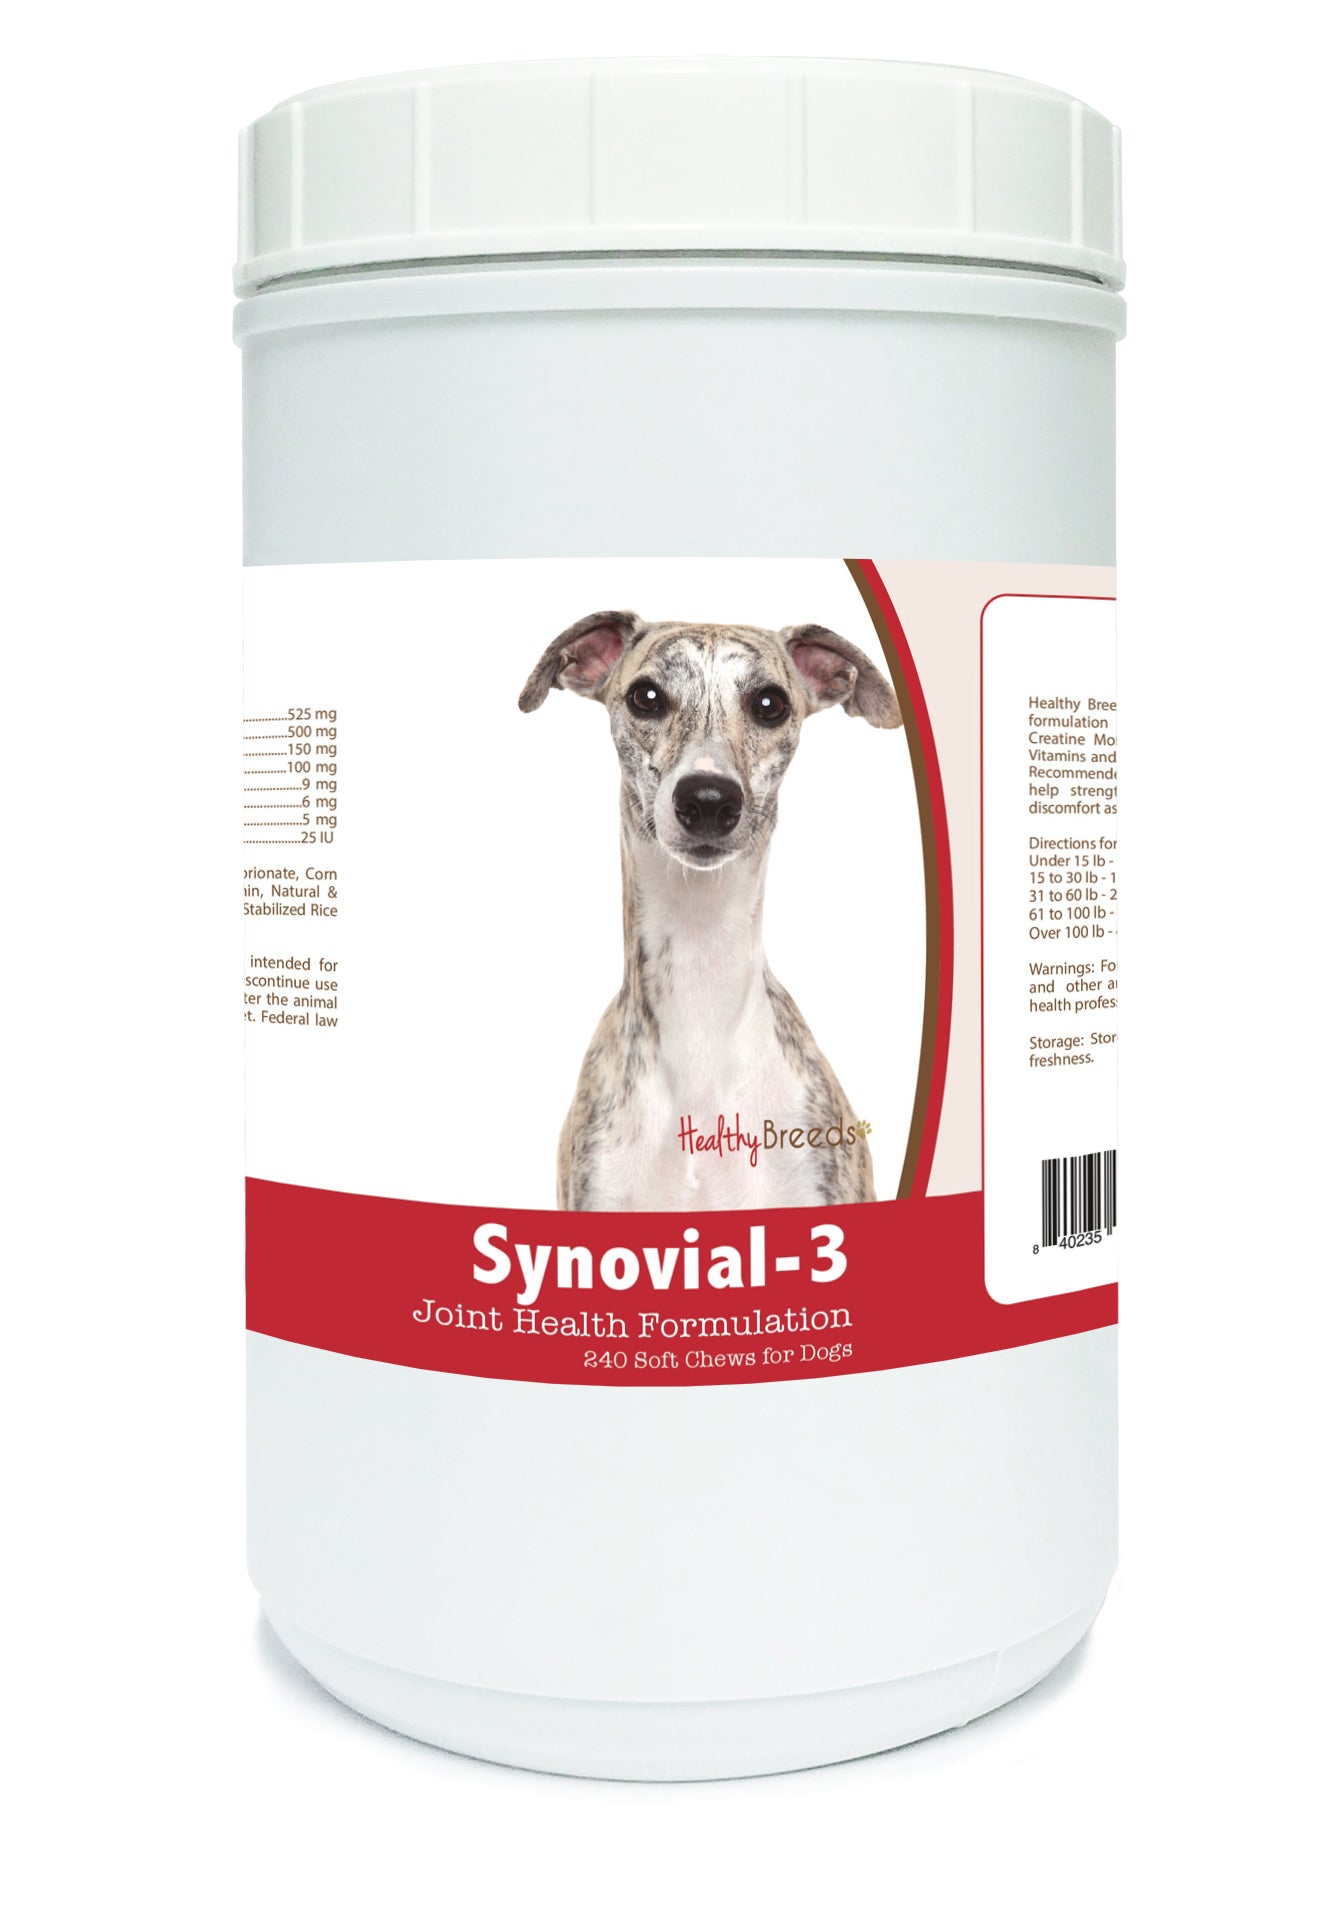 Whippet Synovial-3 Joint Health Formulation Soft Chews 240 Count